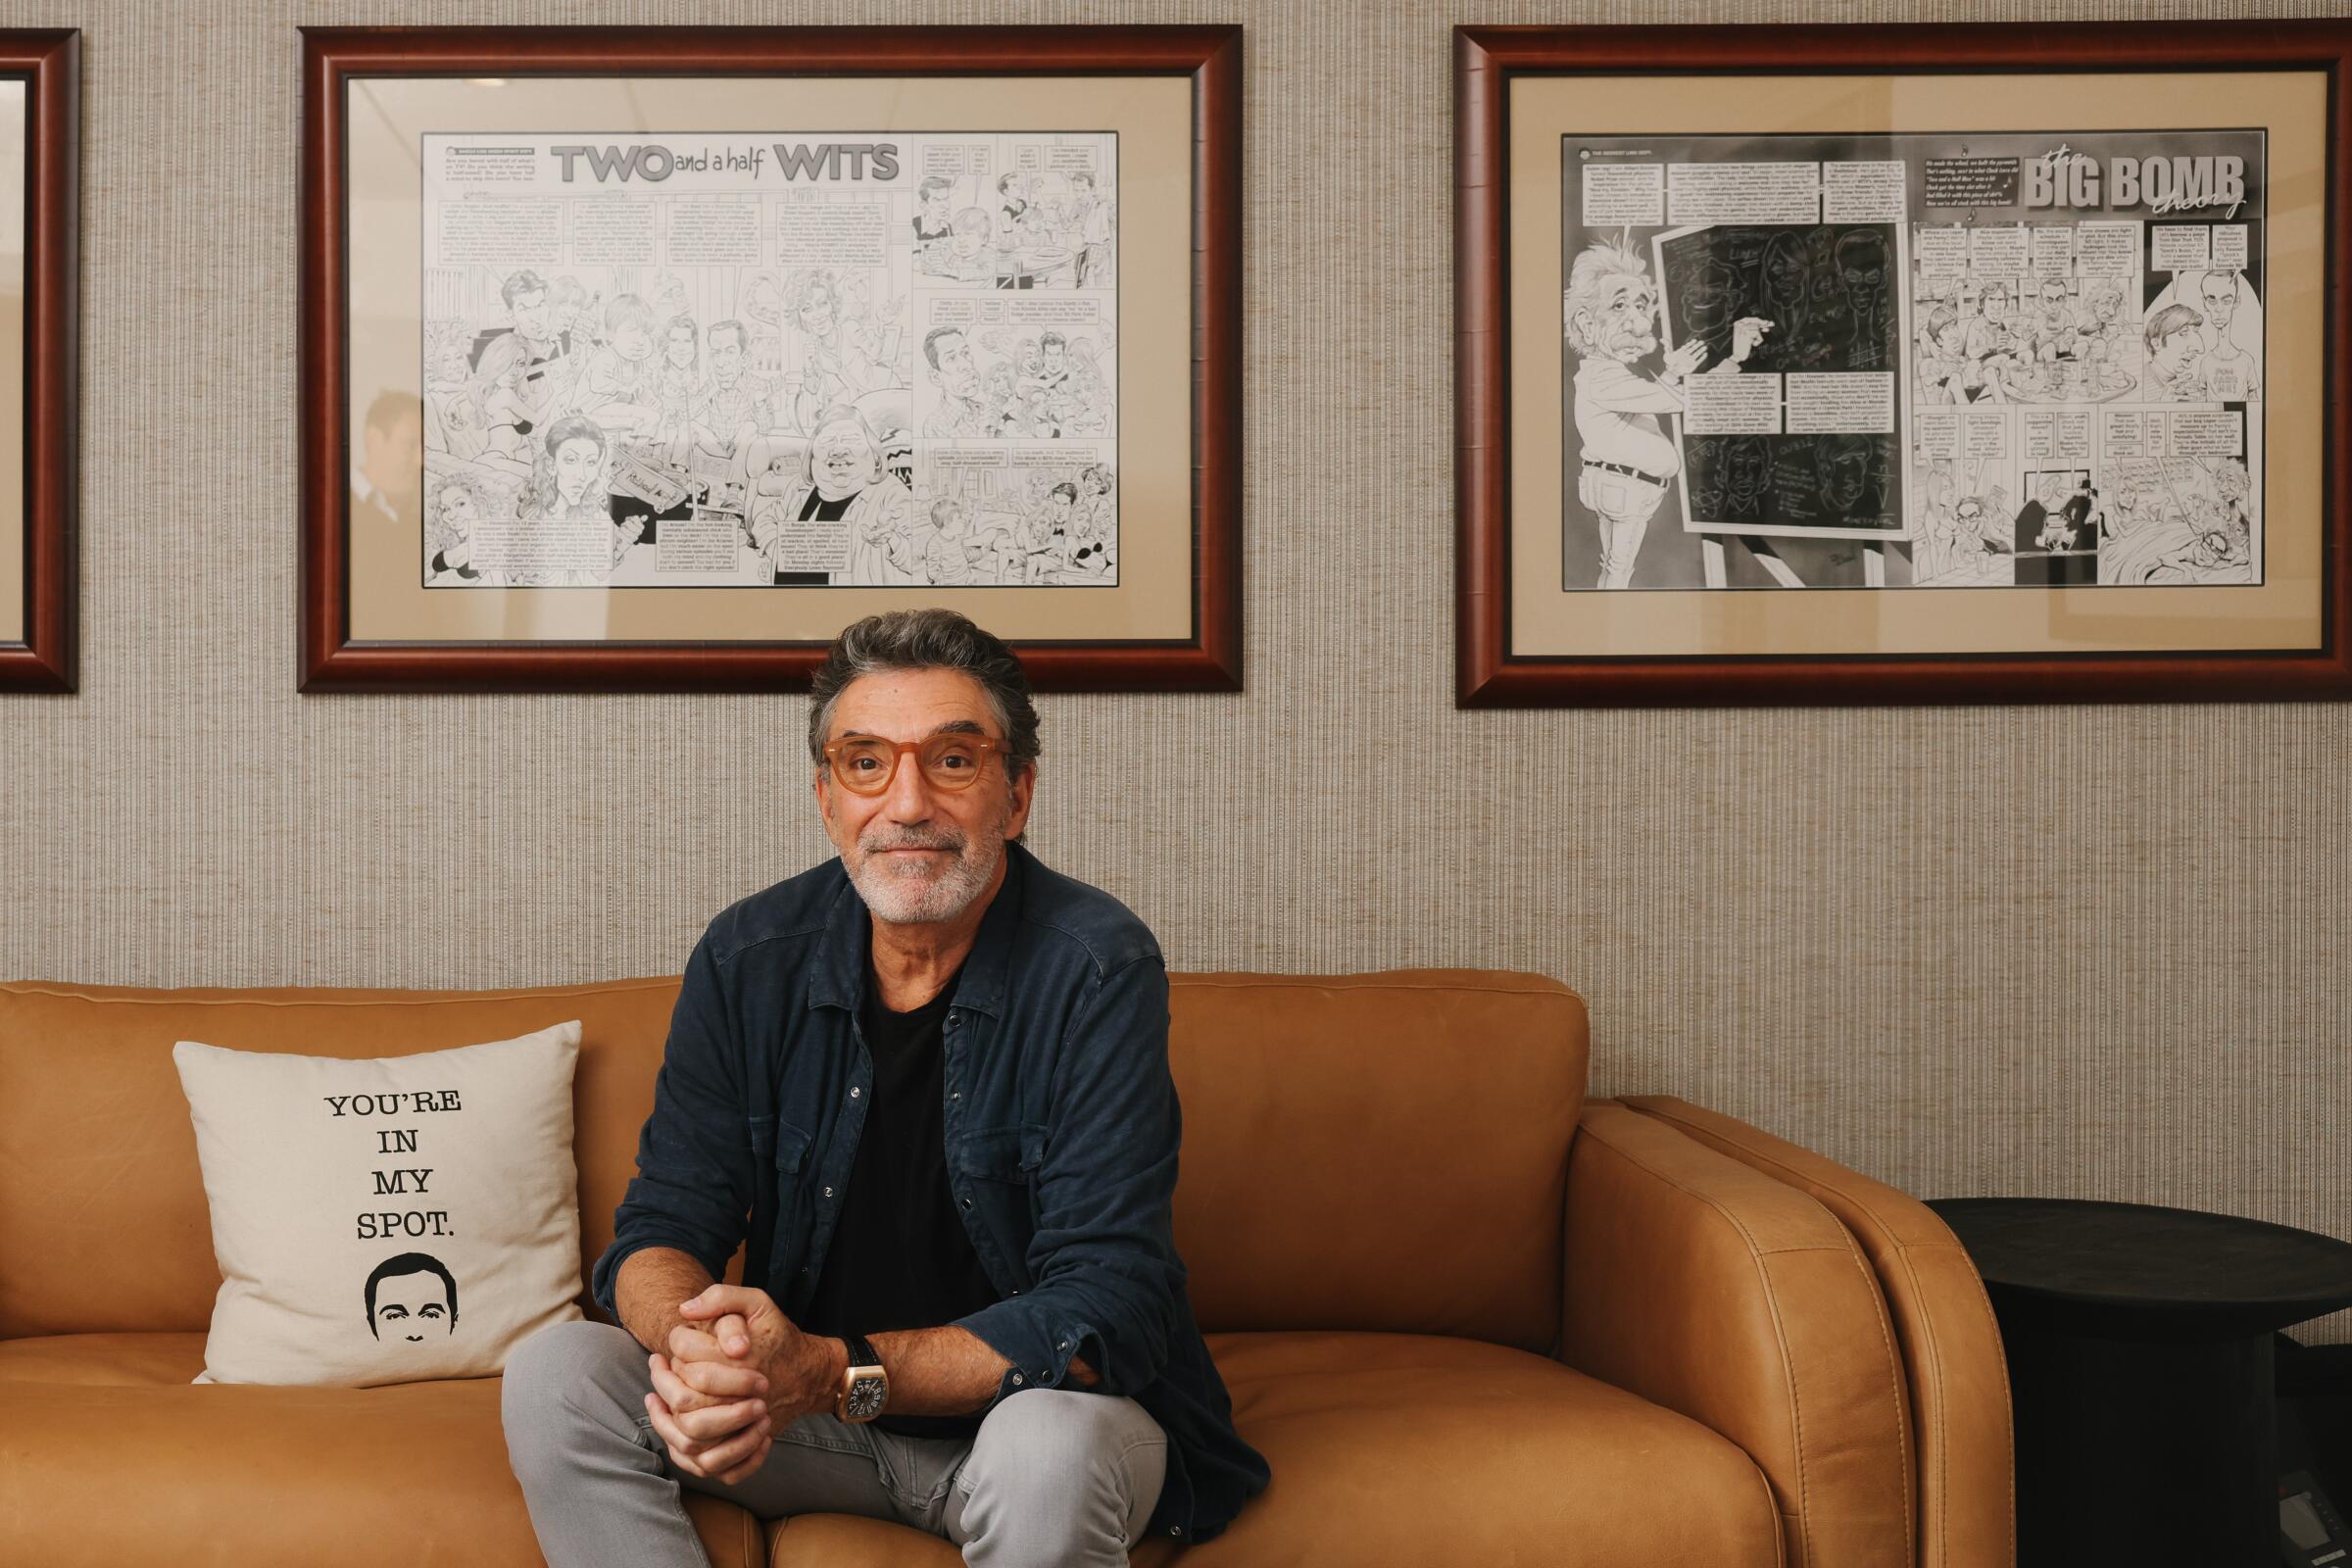 Chuck Lorre sits on a couch next to a white pillow that says "you are in my spot." Framed cartoon drawings hang on the wall.